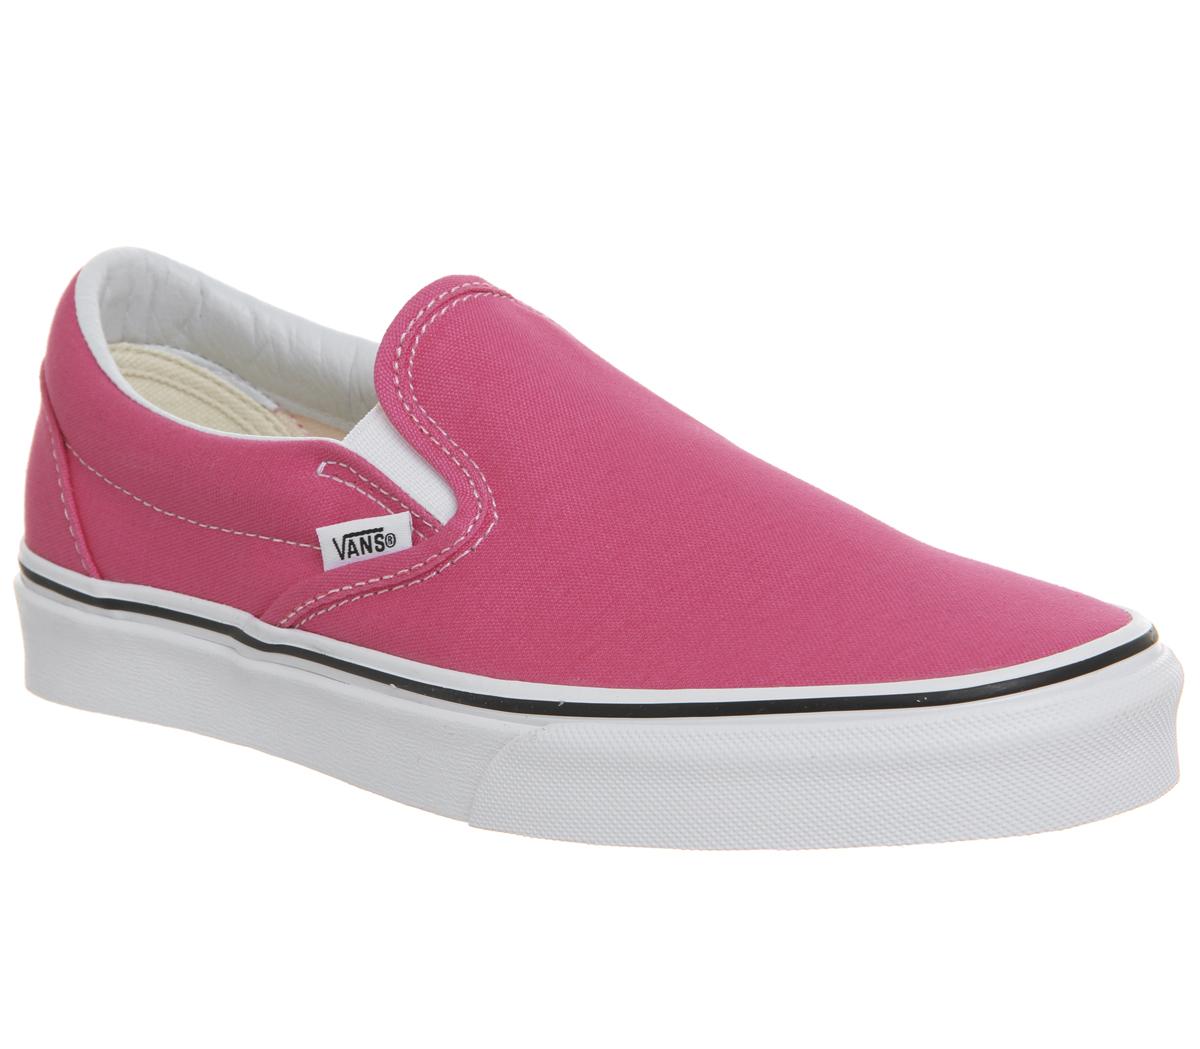 hot pink slip on shoes